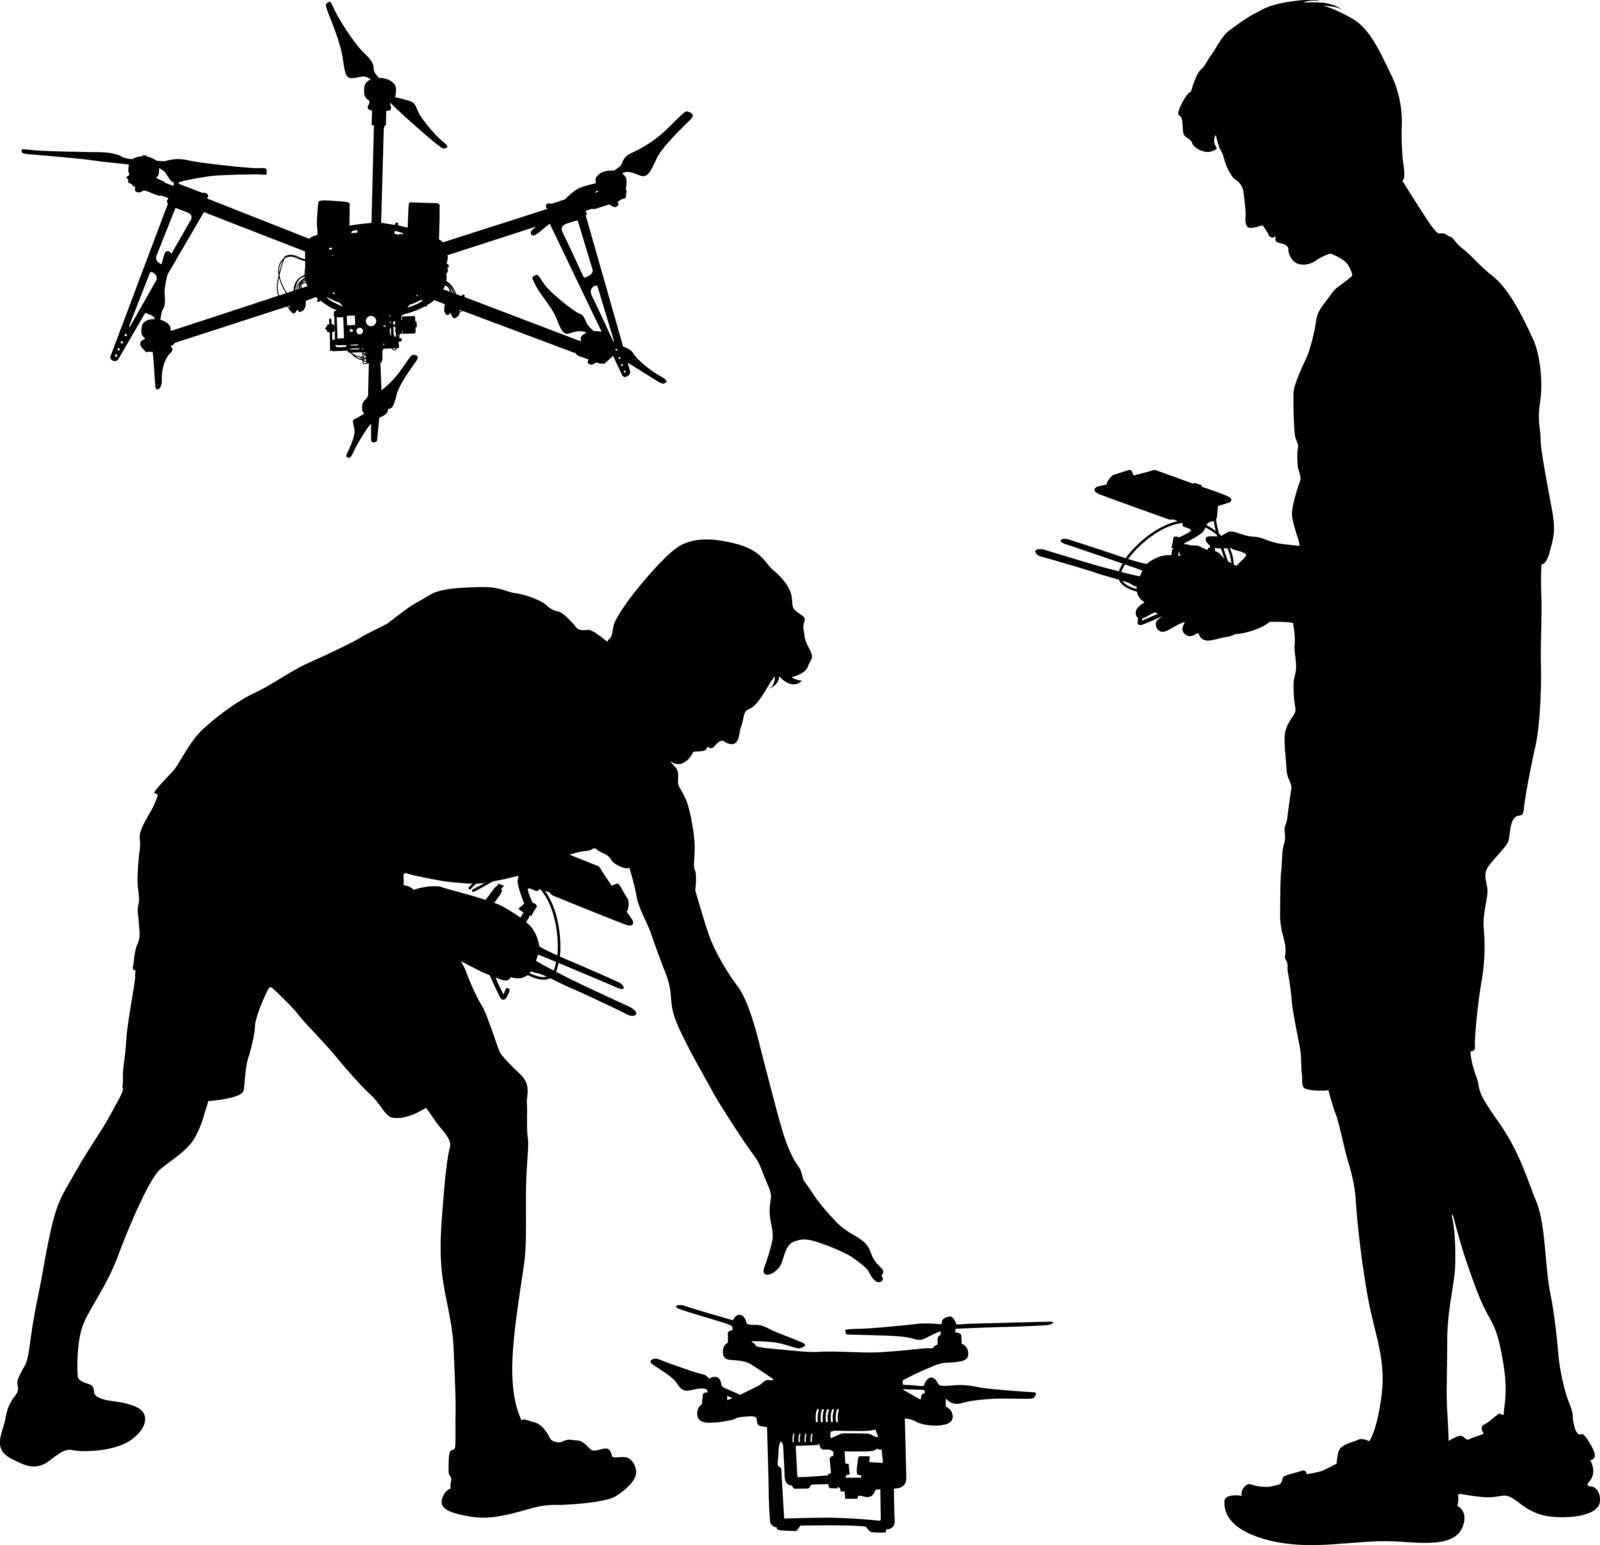 Black silhouette of a man operates unmanned quadcopter vector illustration.